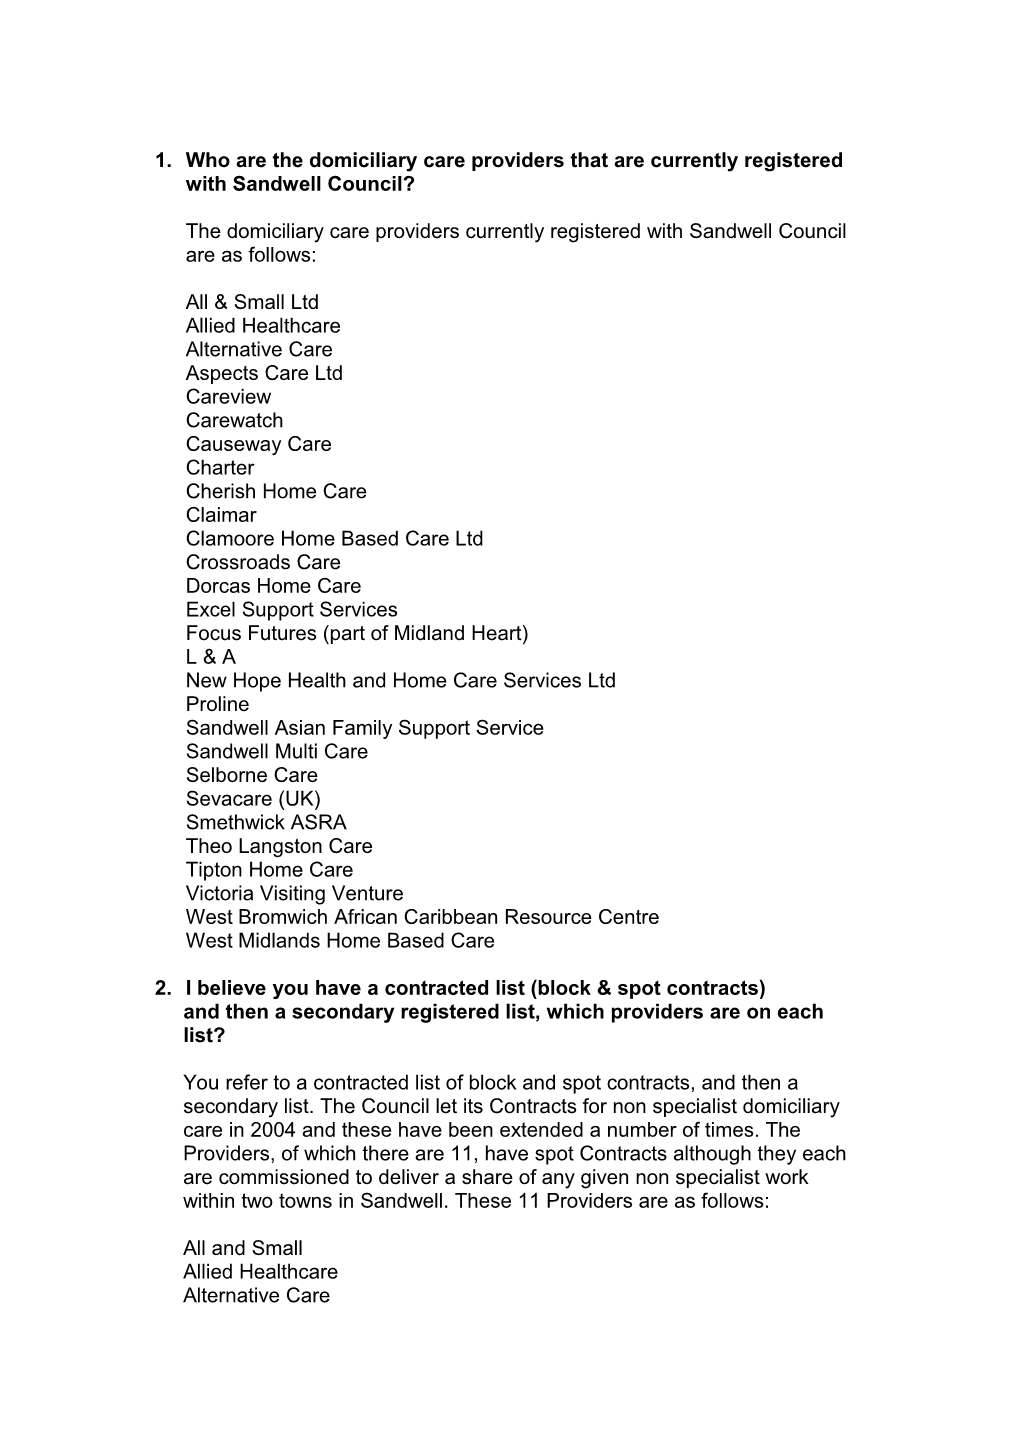 The Domiciliary Care Providers Currently Registered with Sandwell Council Are As Follows